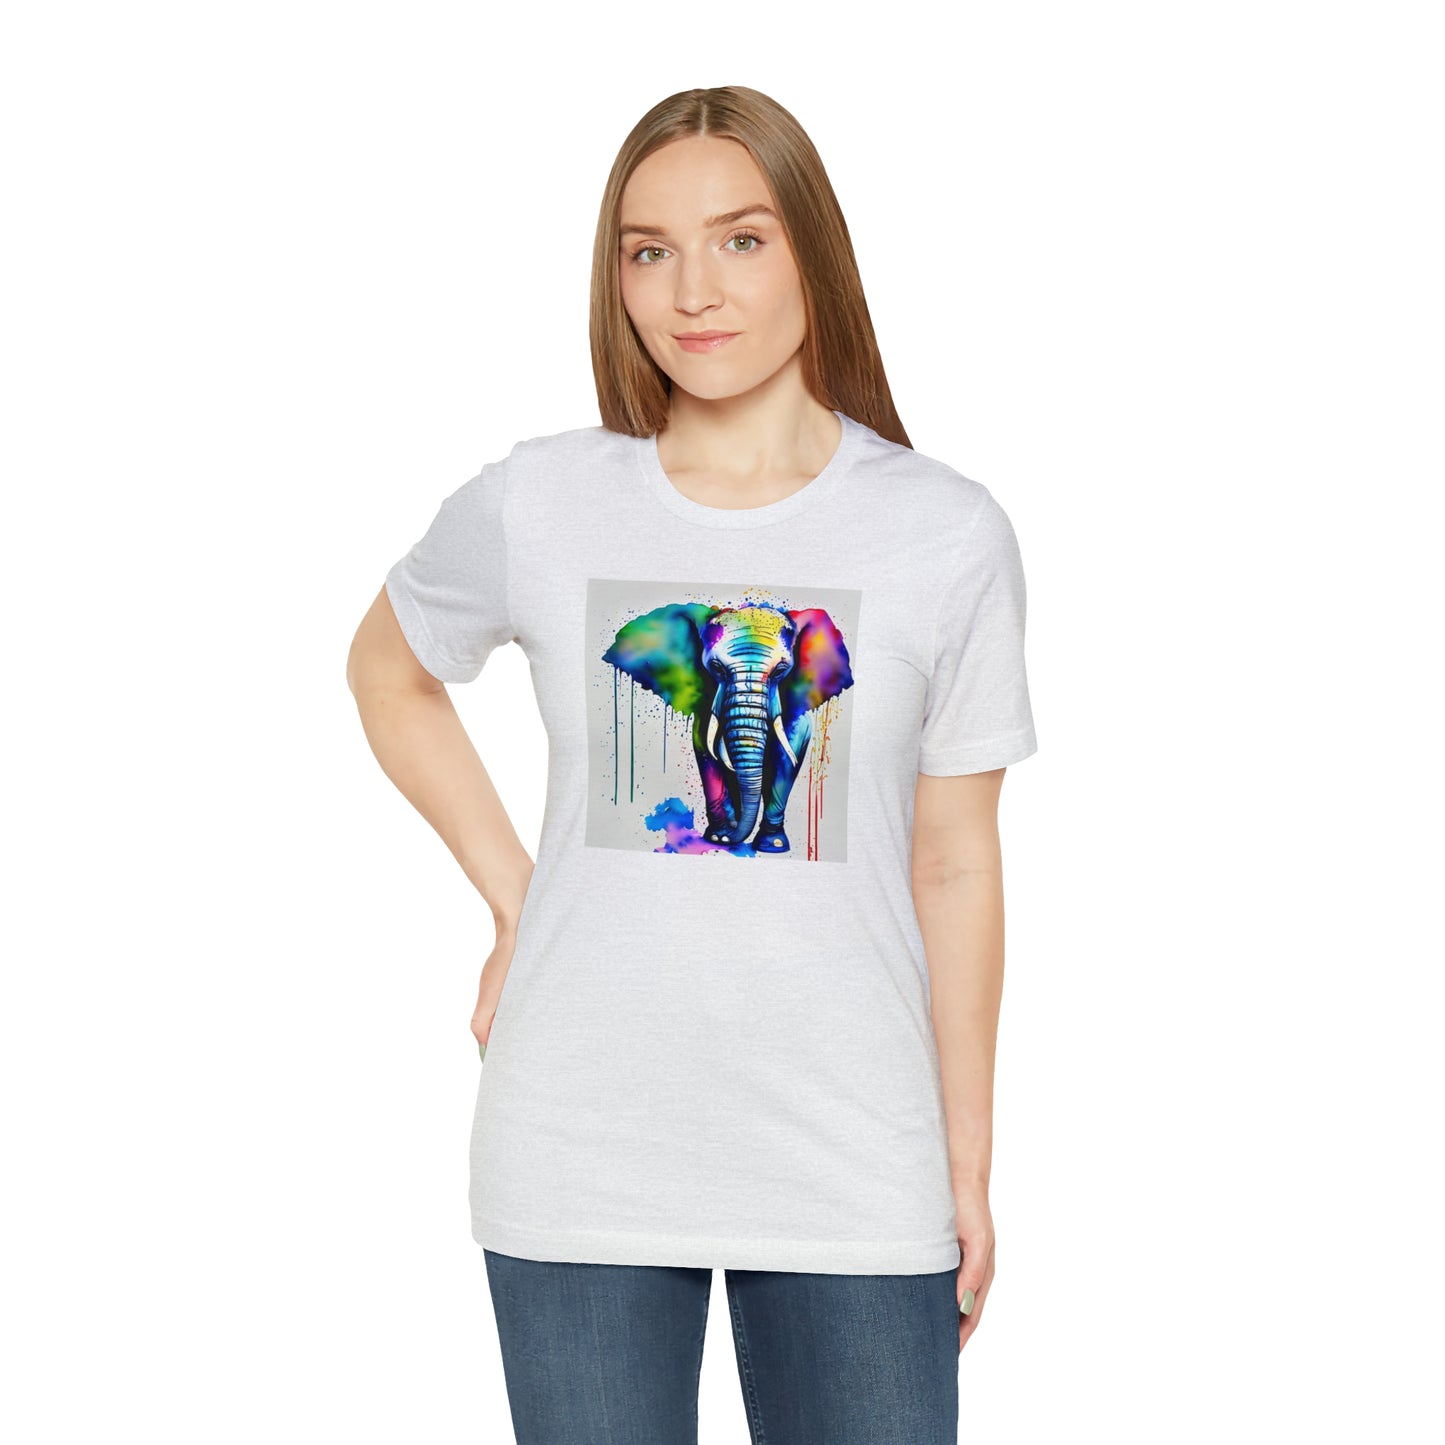 Dripping Watercolor Elephant Tee